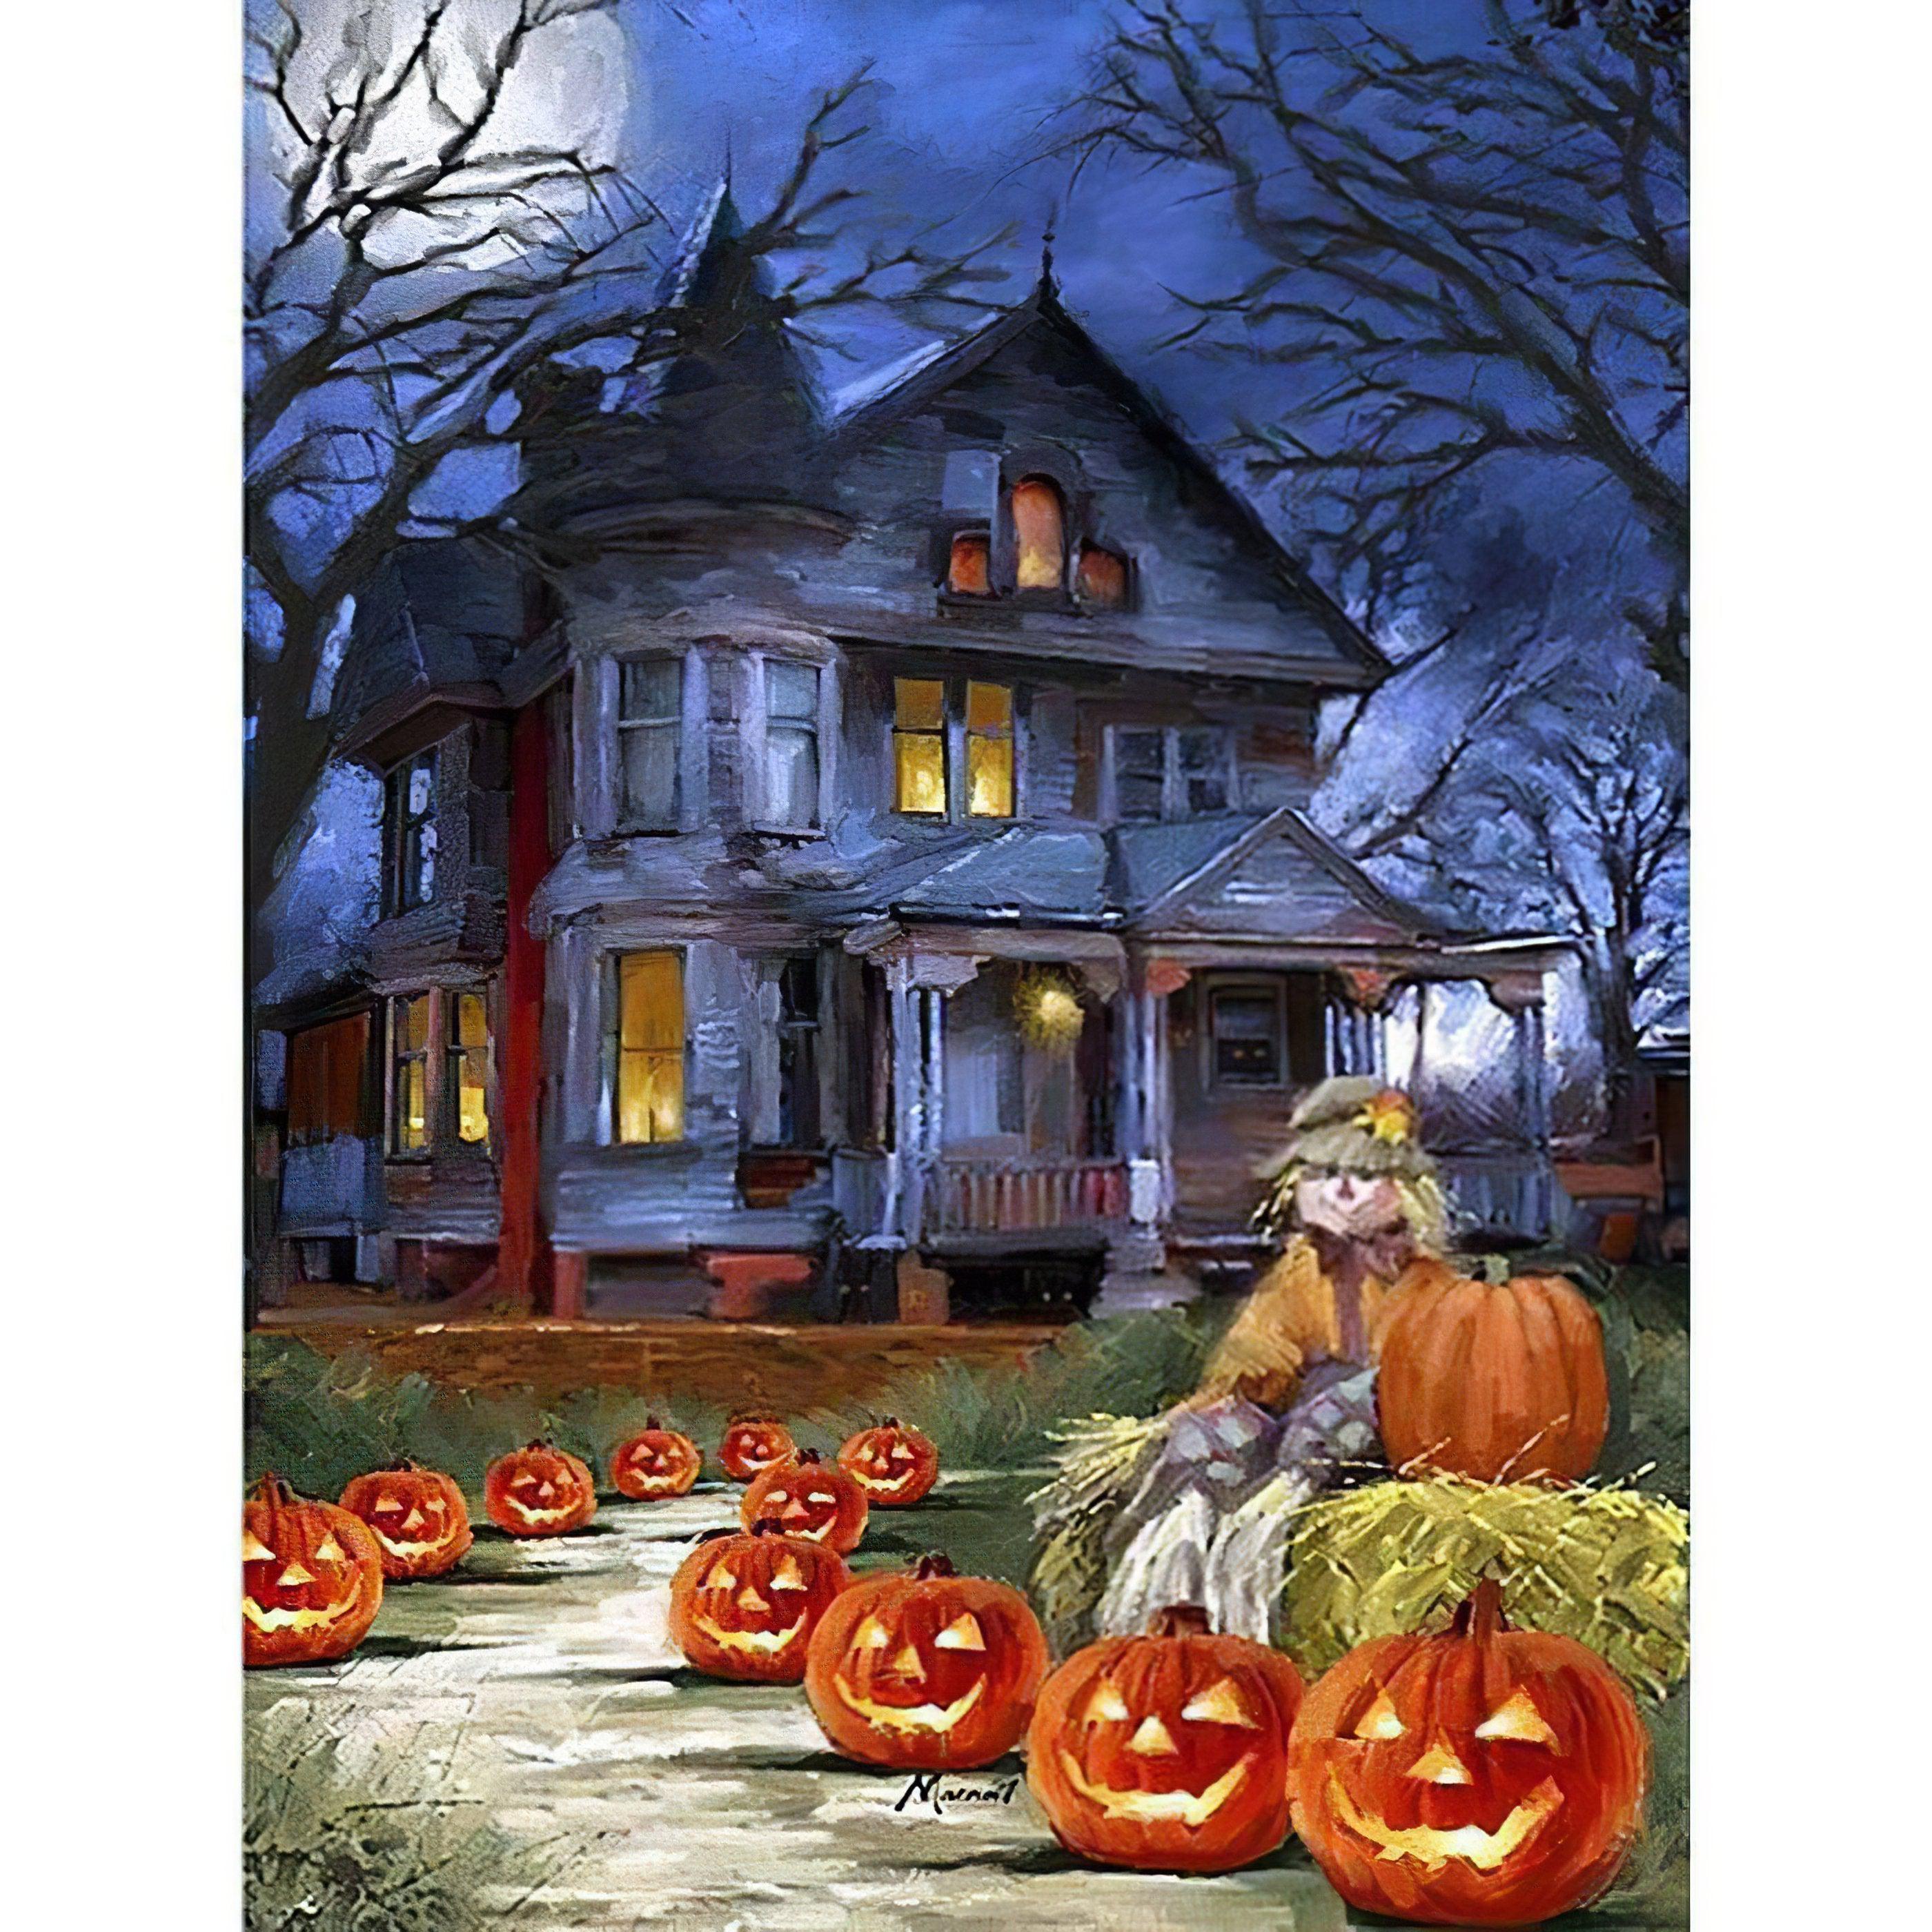 Halloween Witch House